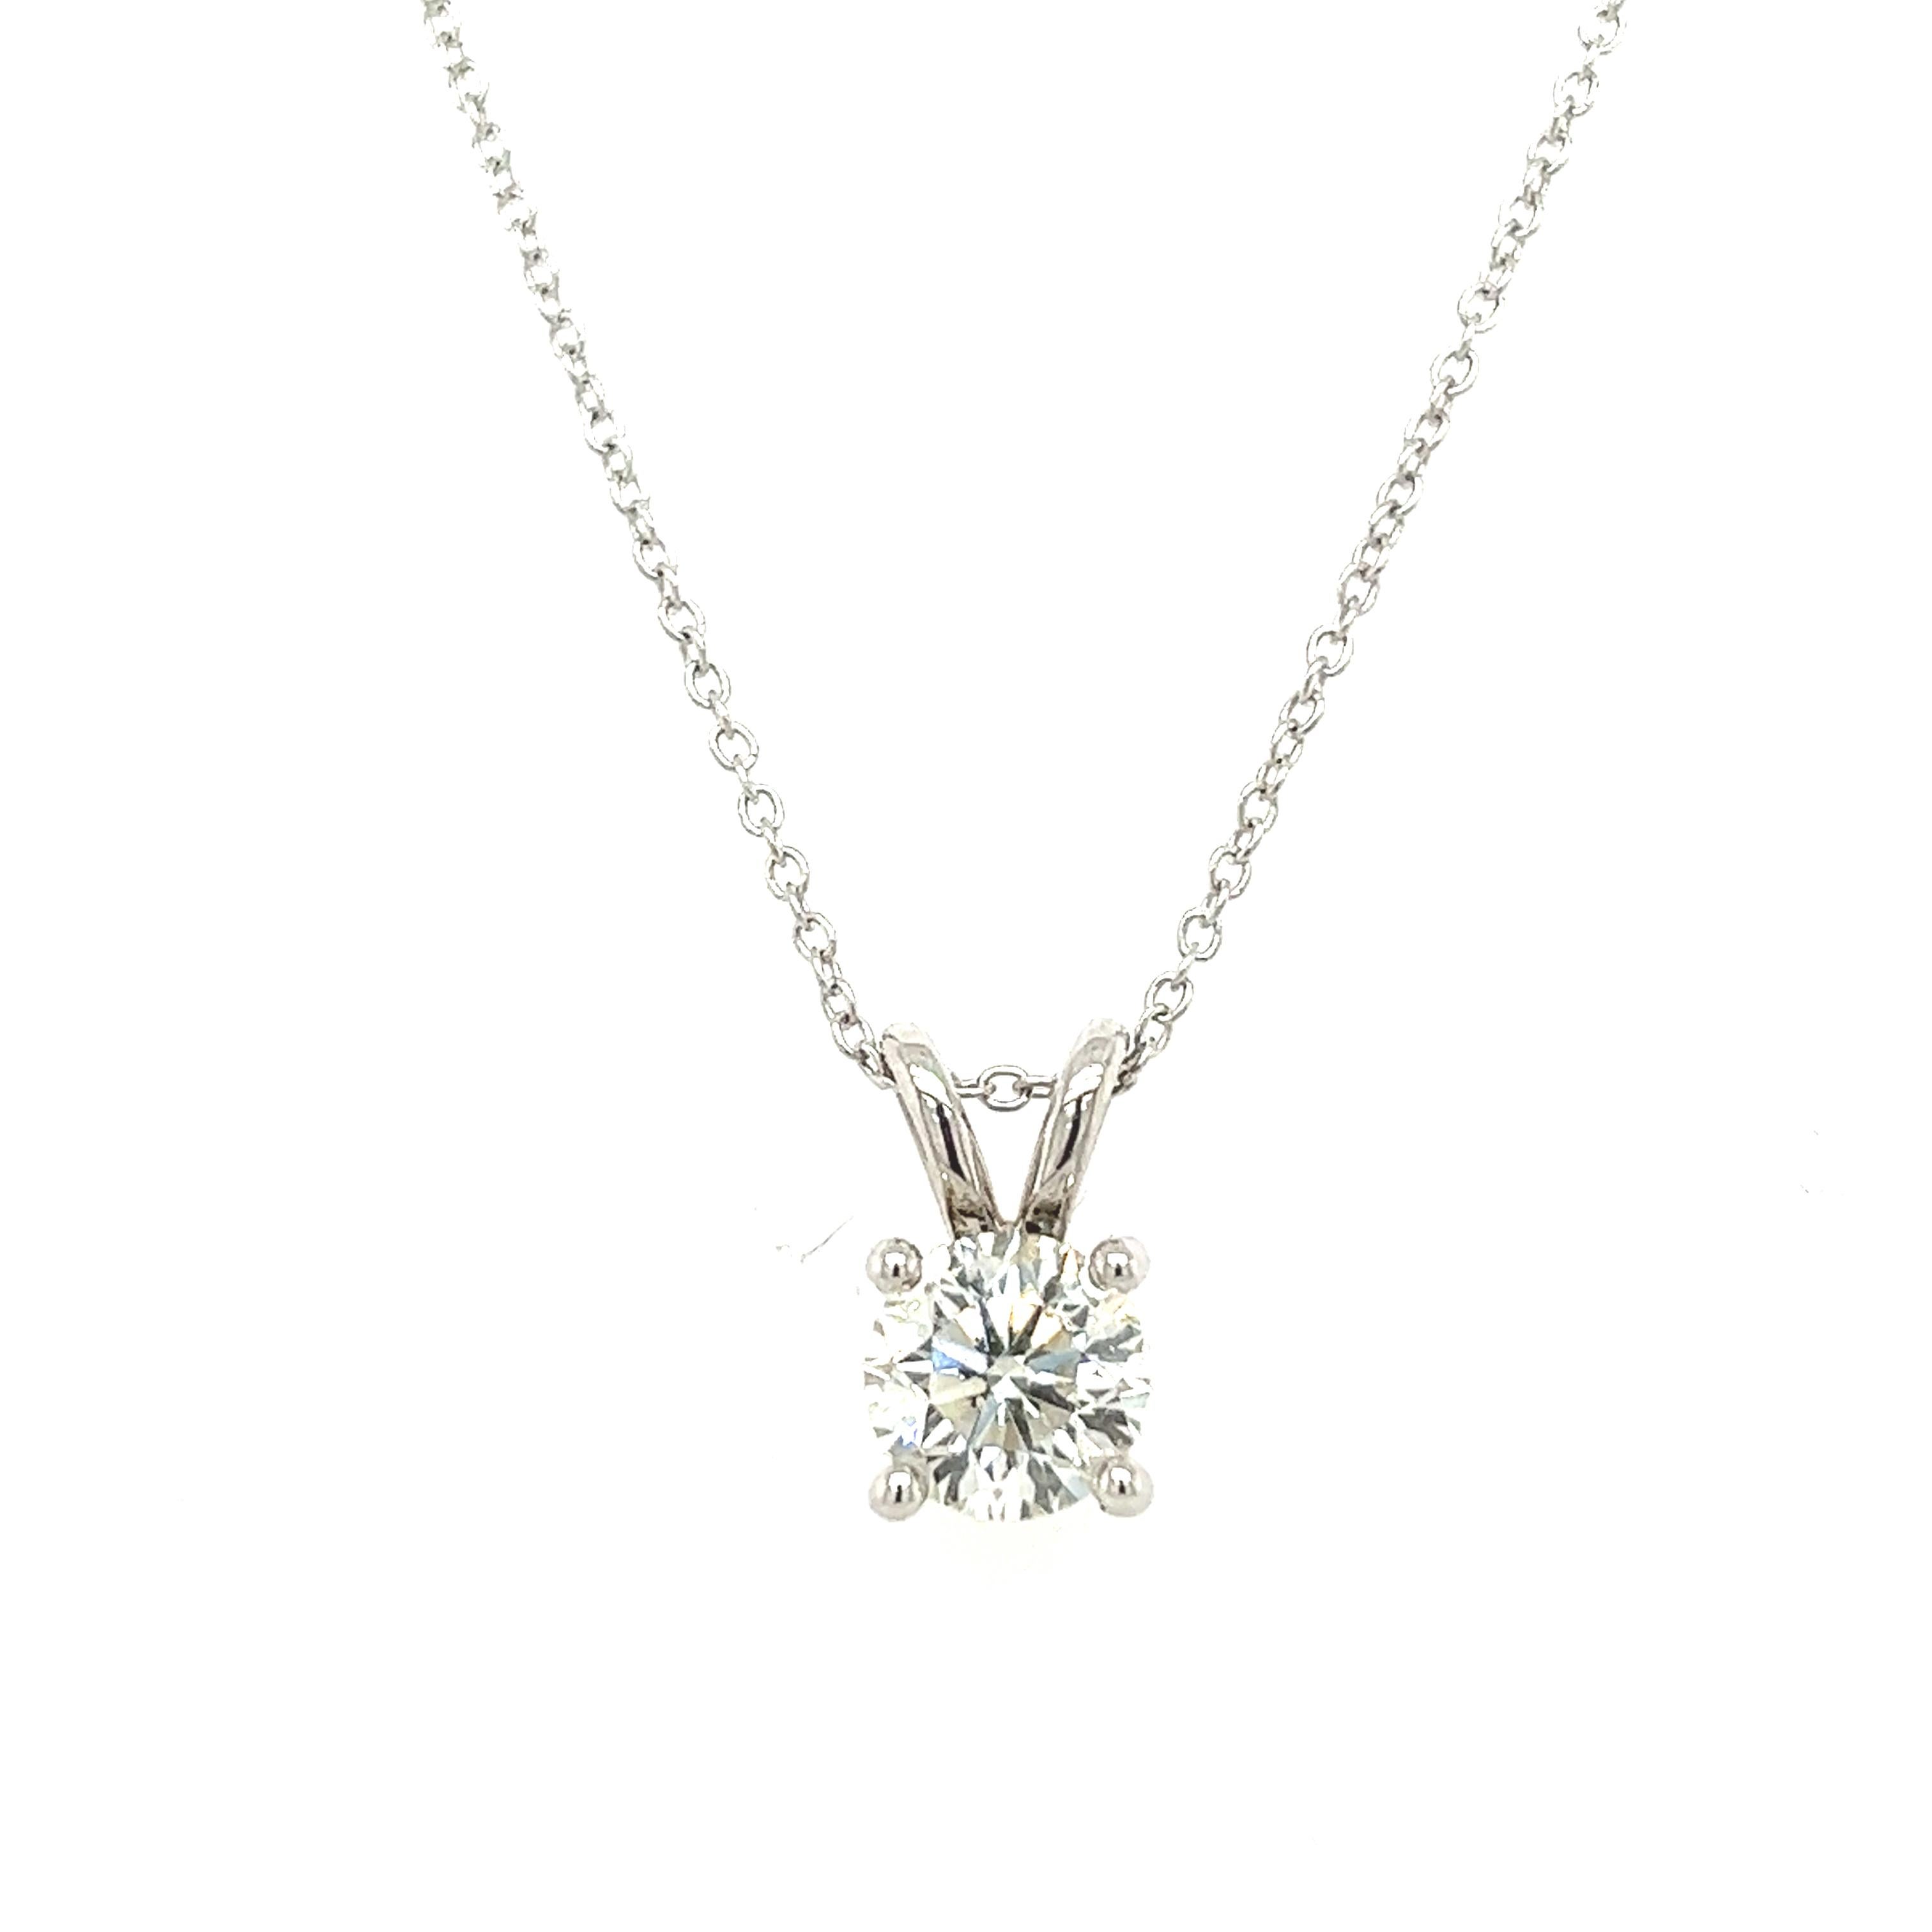 The necklace chain is designed to hold the pendant at the centre of the chest,
set with 1 round brilliant cut diamond 1.04ct J/SI2 HRD certified
making it a very elegant and beautiful piece of jewellery. 
Total Diamond Weight: 1.04ct
Diamond Colour: